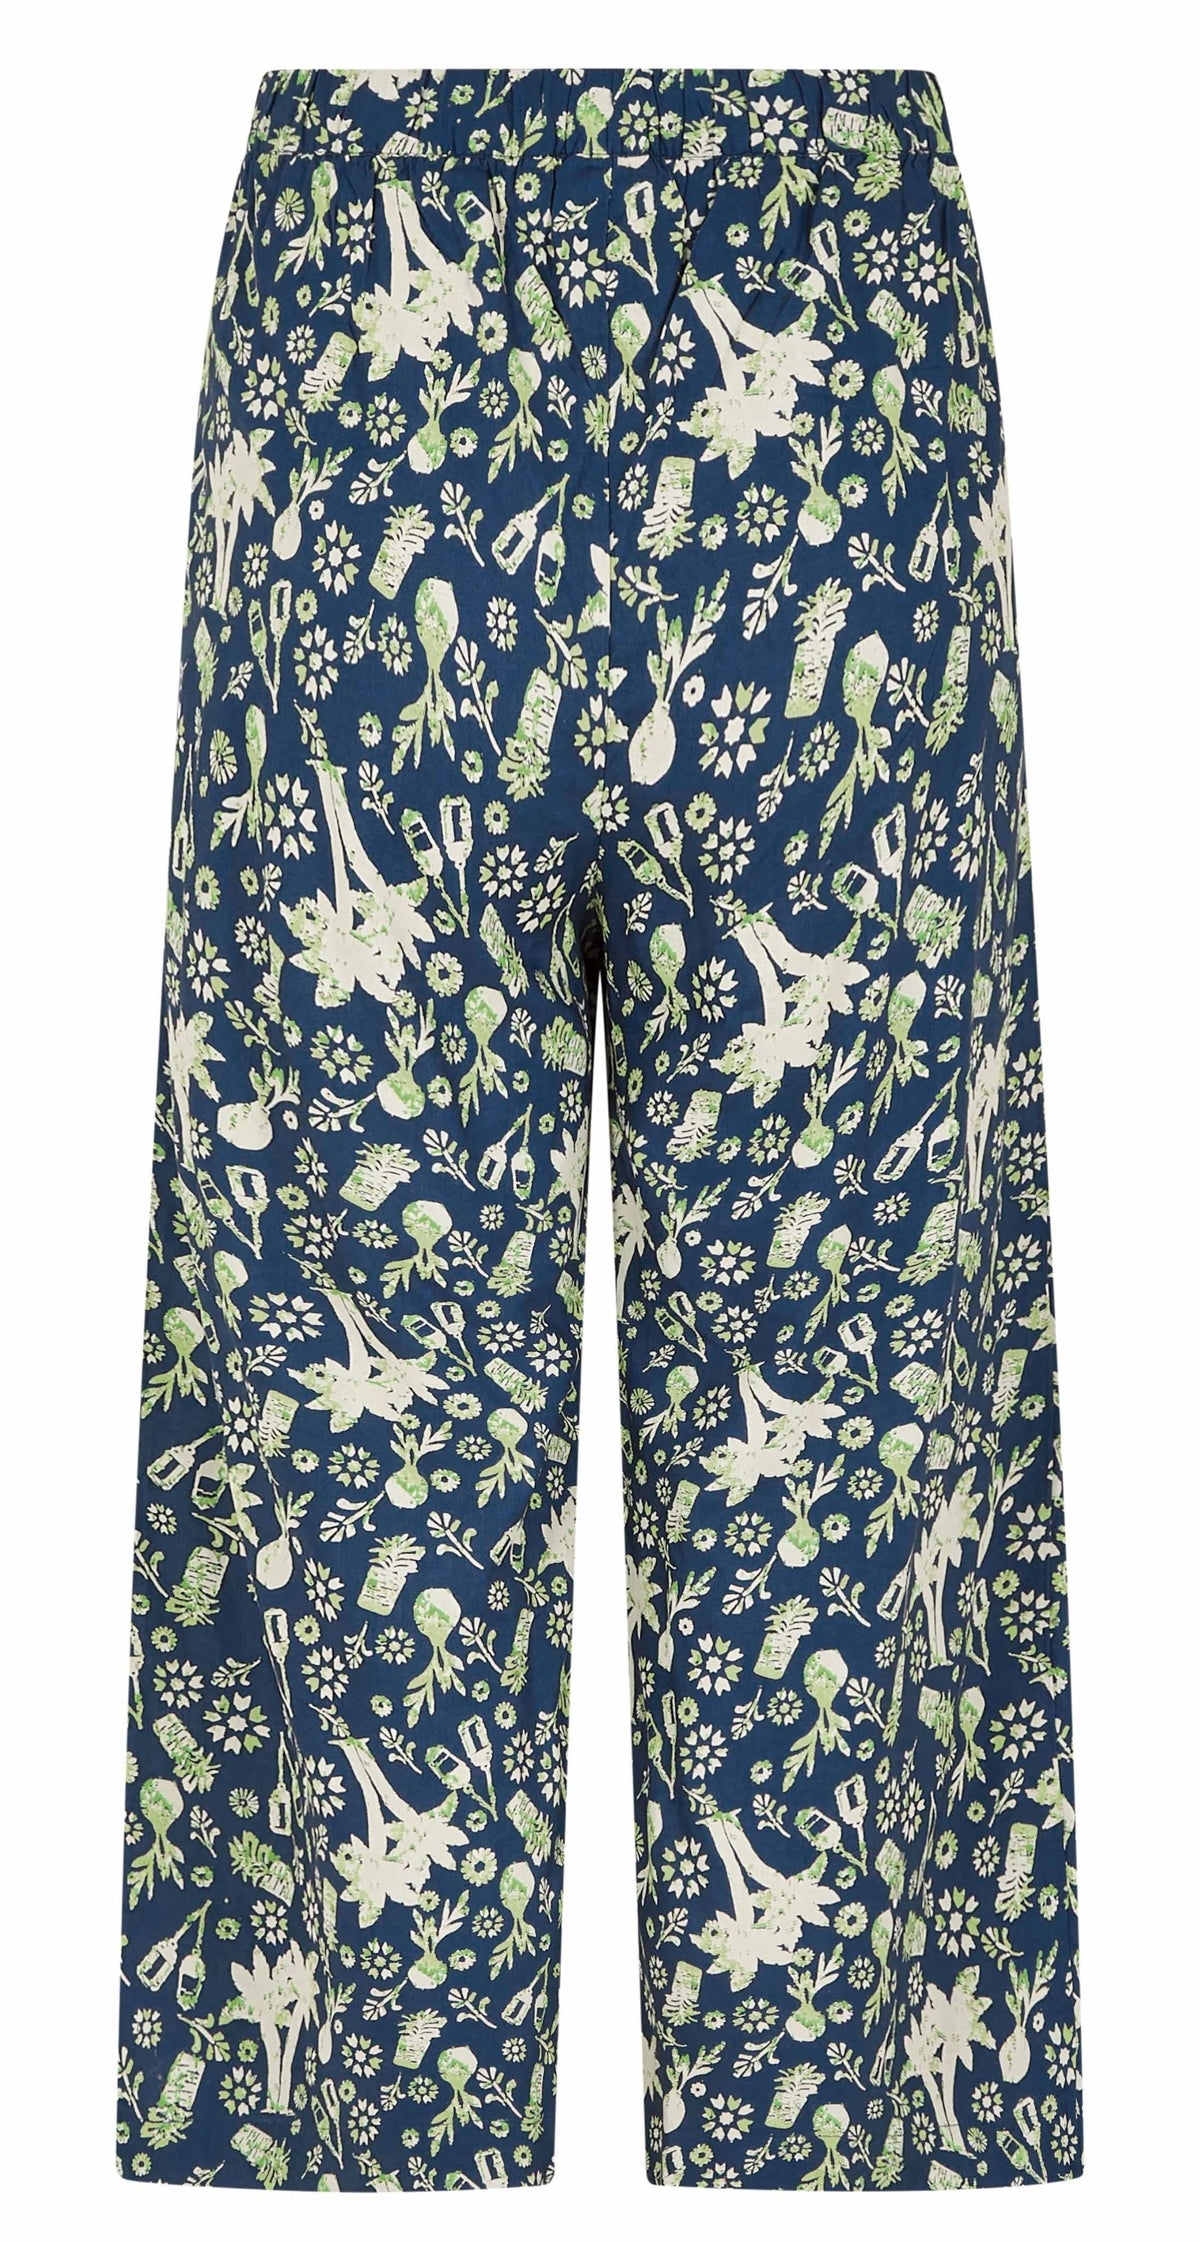 Women's Weird Fish elasticated waist viscose cropped trousers in blue with a tropical print.